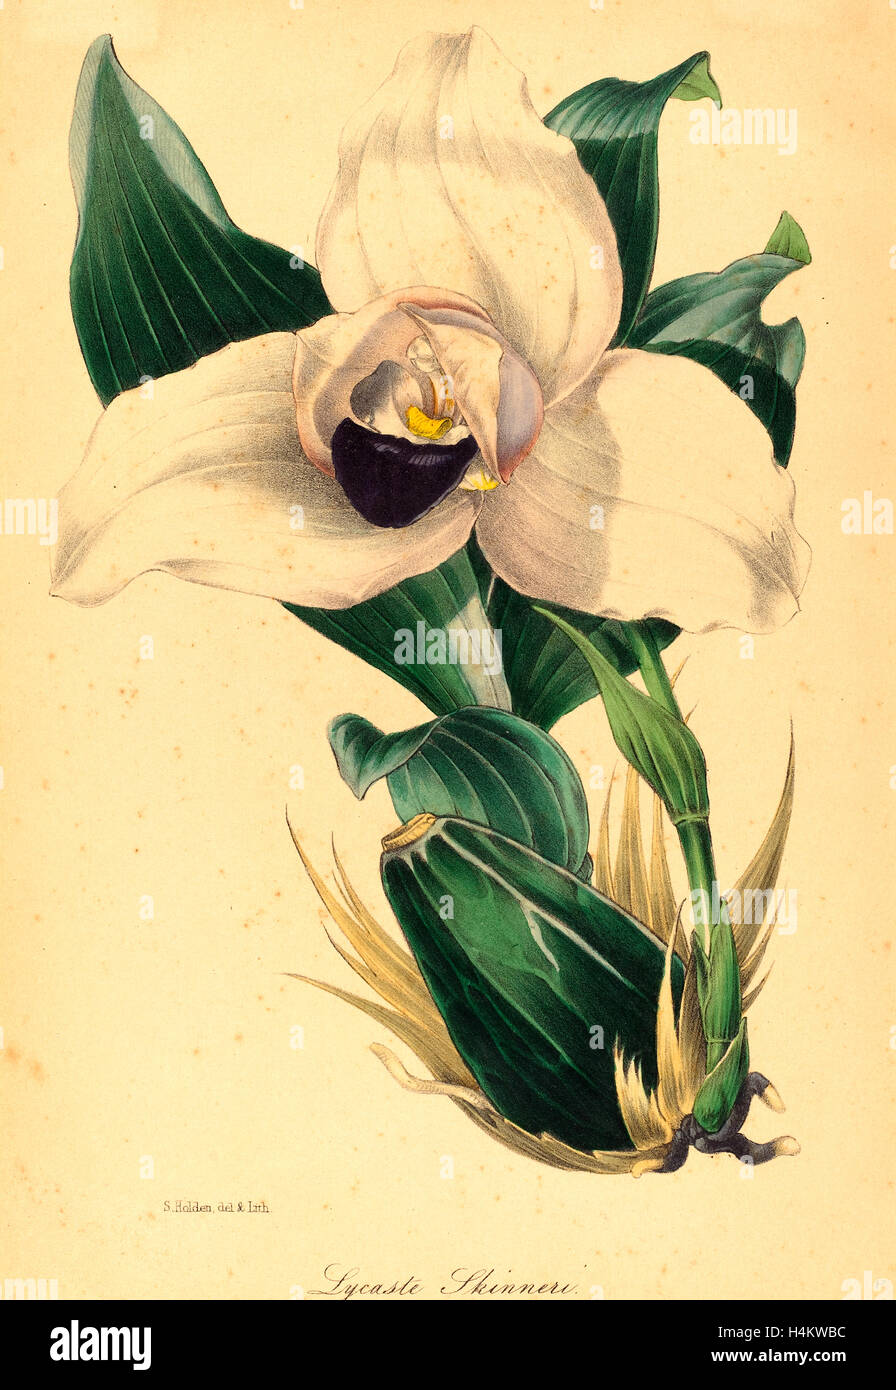 Samuel Holden, Lycaste Skinneri, British, active 1845-1847, hand-colored lithograph Stock Photo